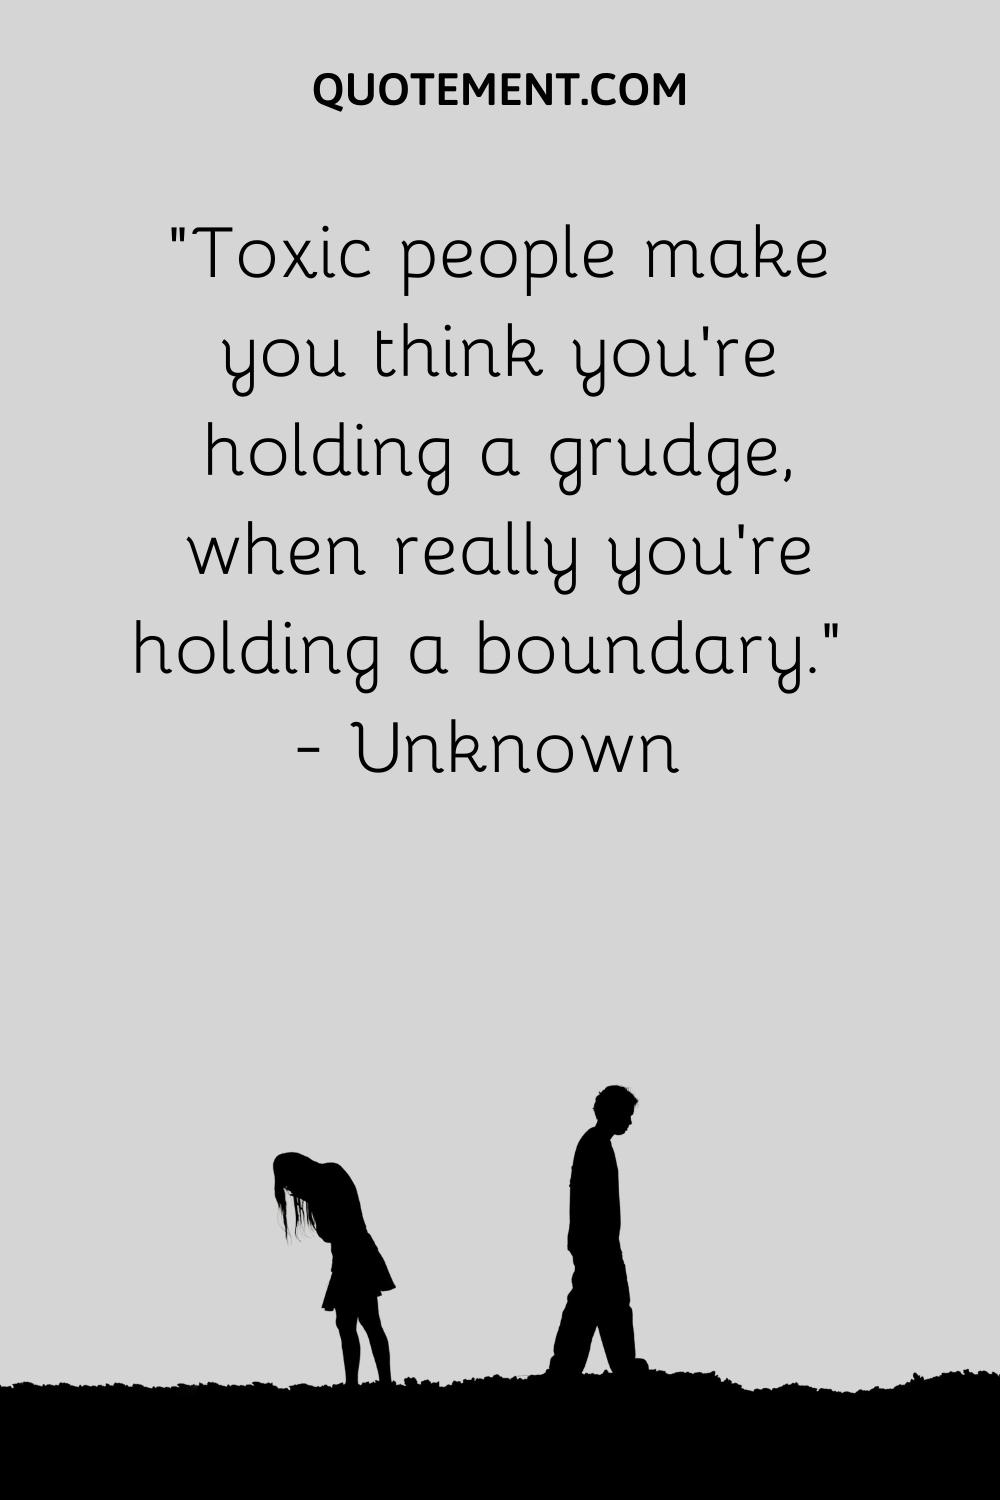 Toxic people make you think you’re holding a grudge, when really you’re holding a boundary